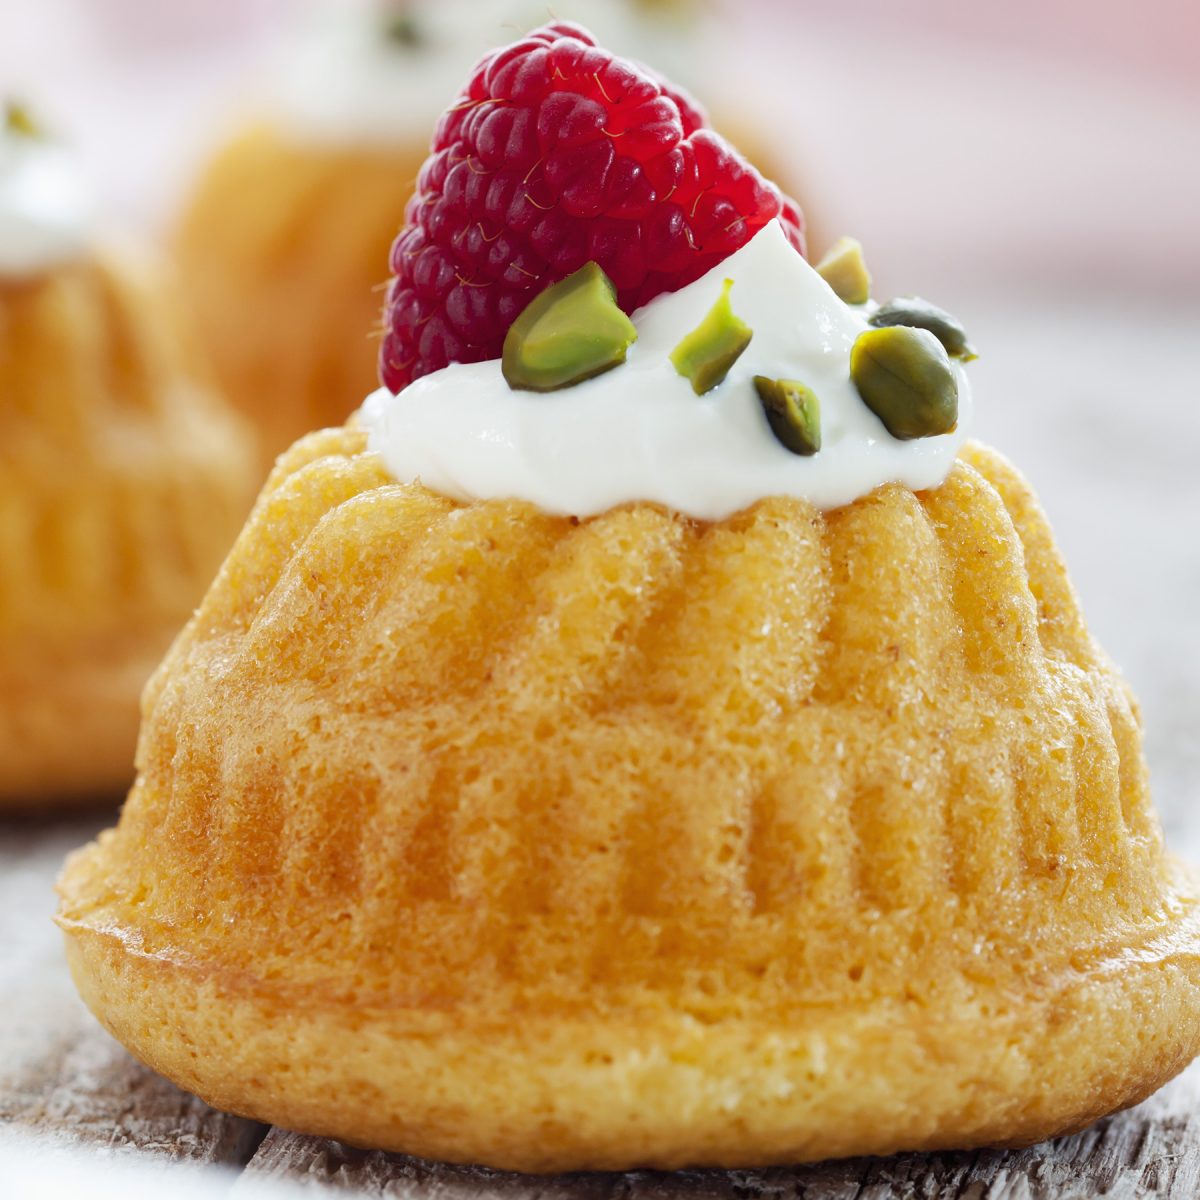 Molded muffins with ricotta cream, raspberries and pistachios - Photo by Tuned_In/Getty